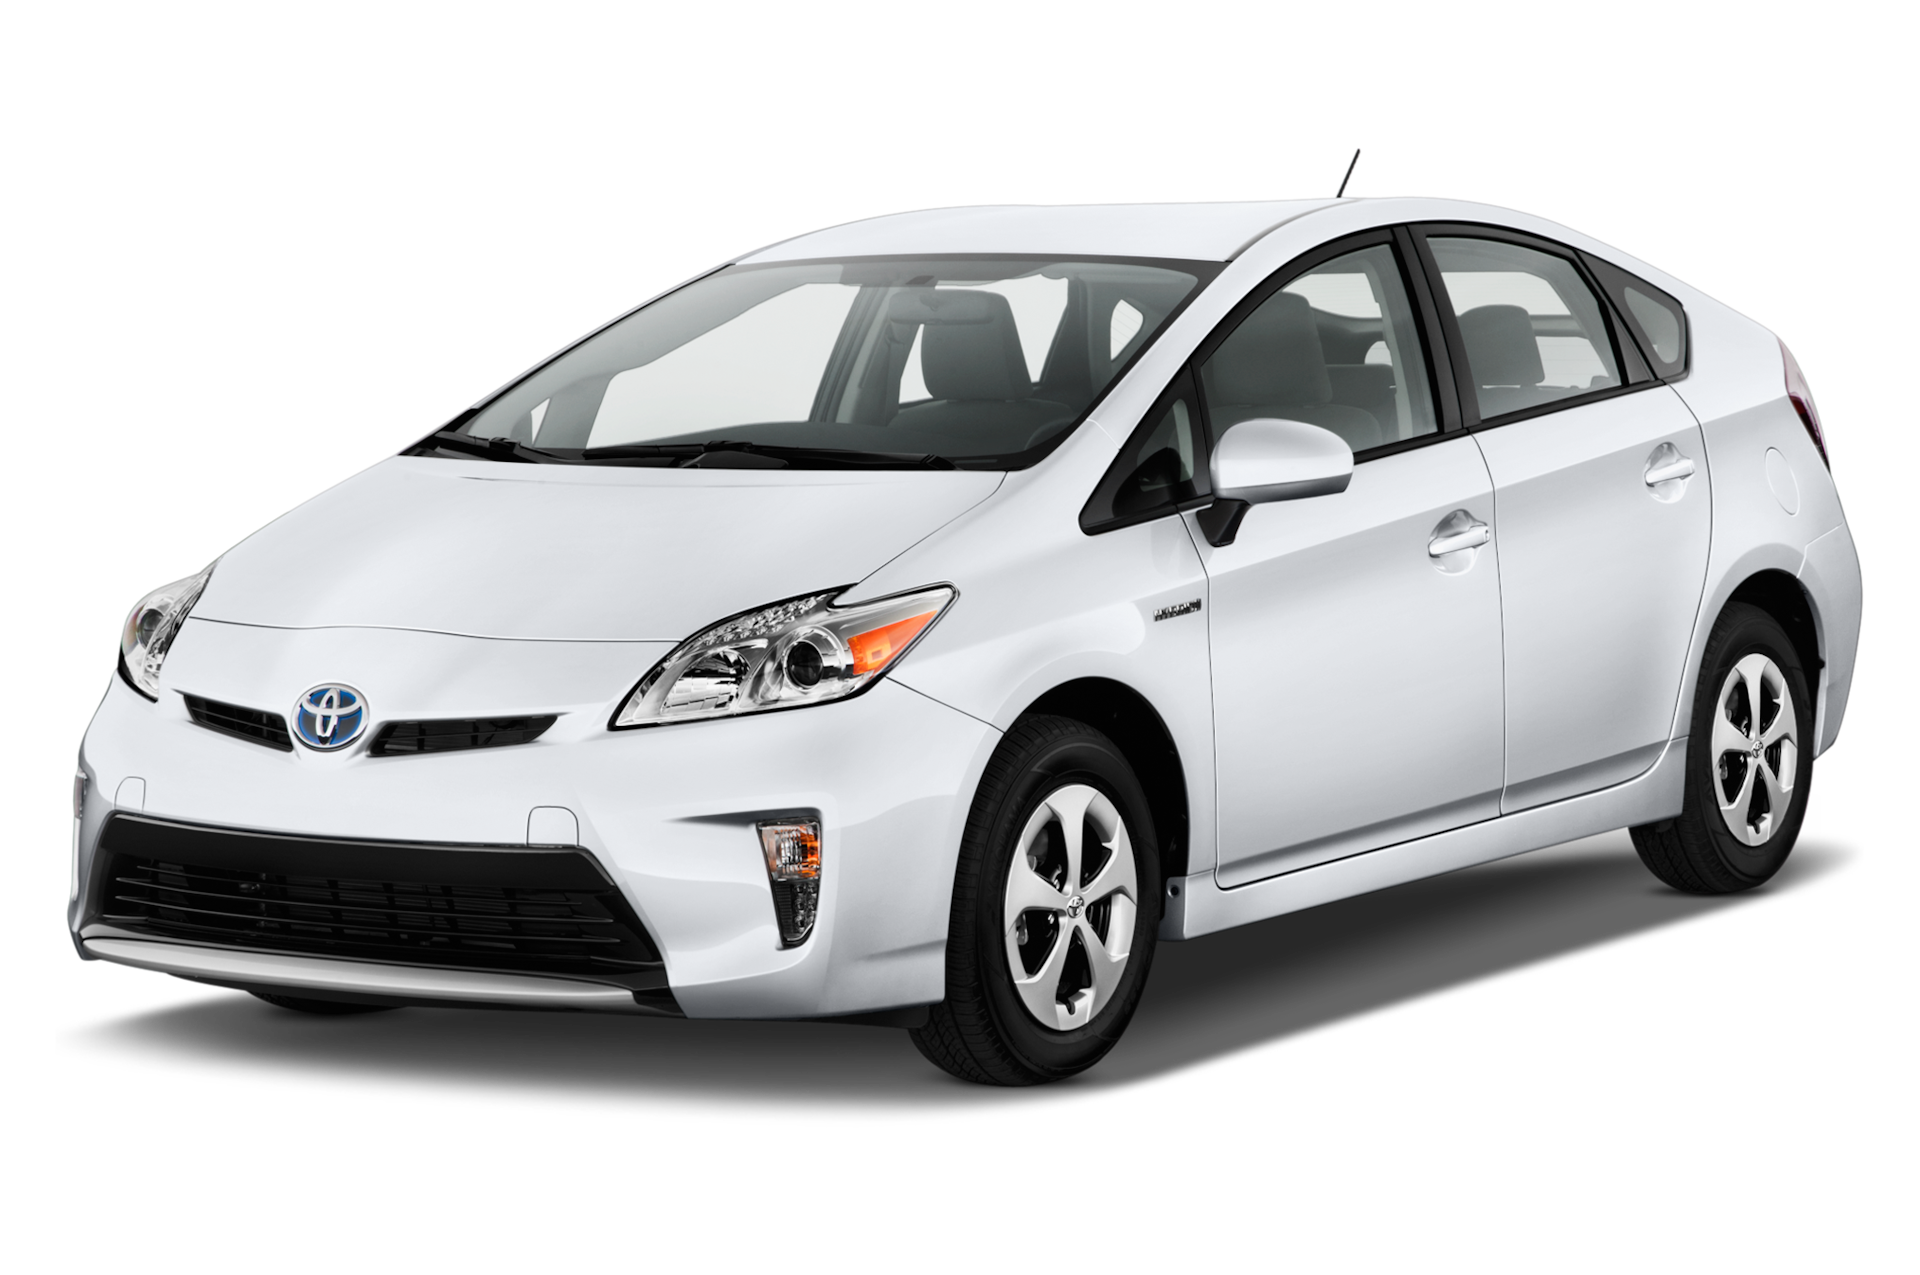 2015 Toyota Prius Prices, Reviews, and Photos - MotorTrend